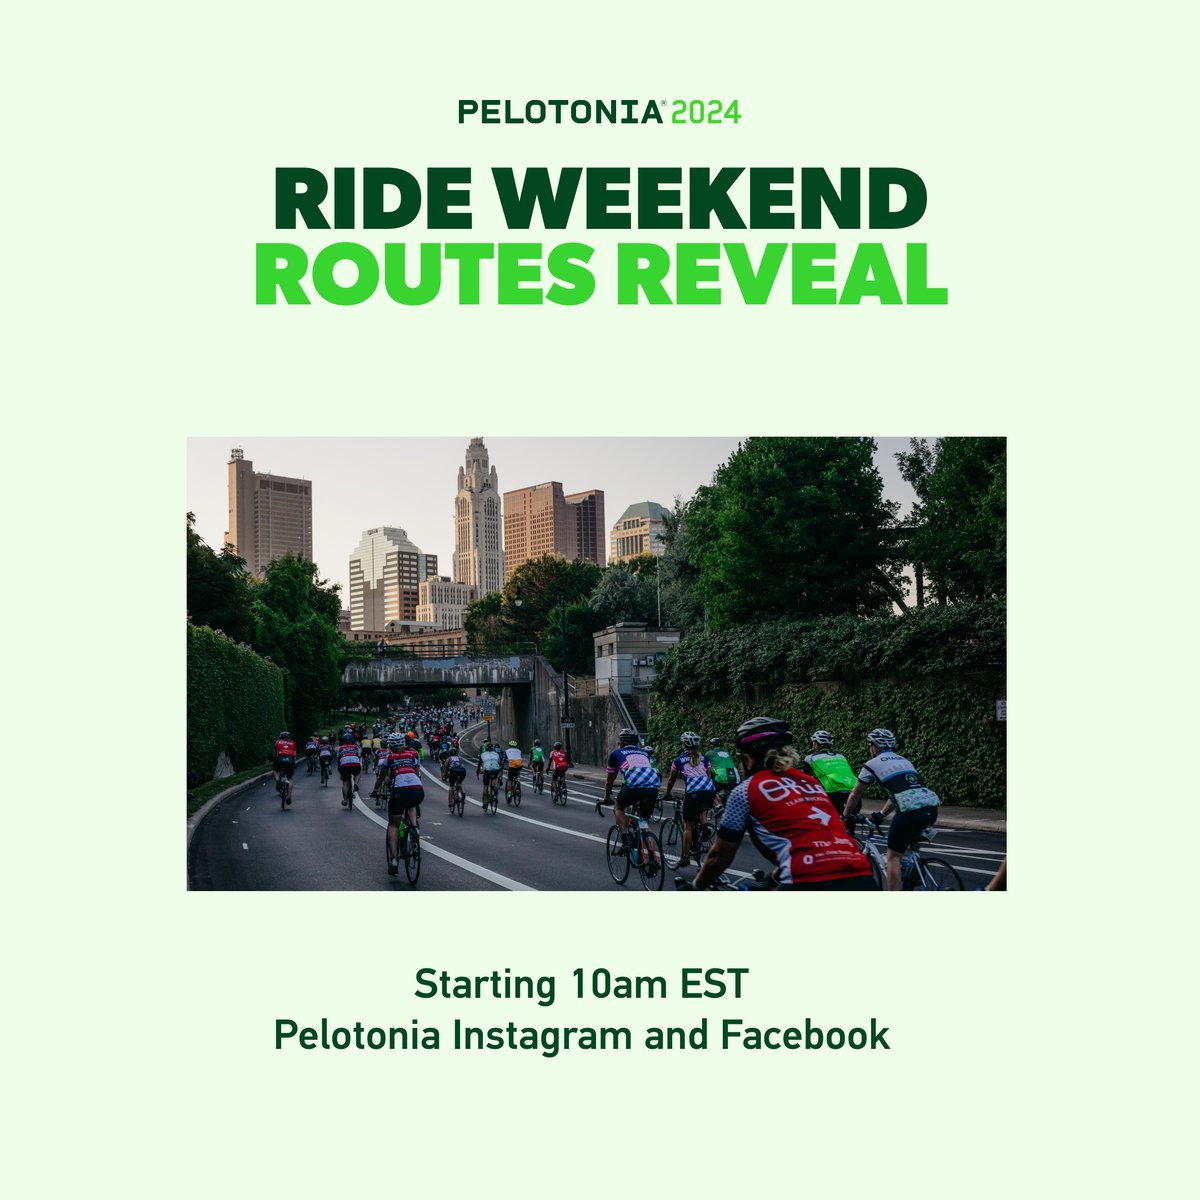 Ride Weekend Routes are here! 🎉 Stay tuned to our Instagram & Facebook accounts as we deep dive into each route at the top of every hour from 10am-4pm. All route info can be found at pelotonia.org/ride-weekend. #EndingCancer